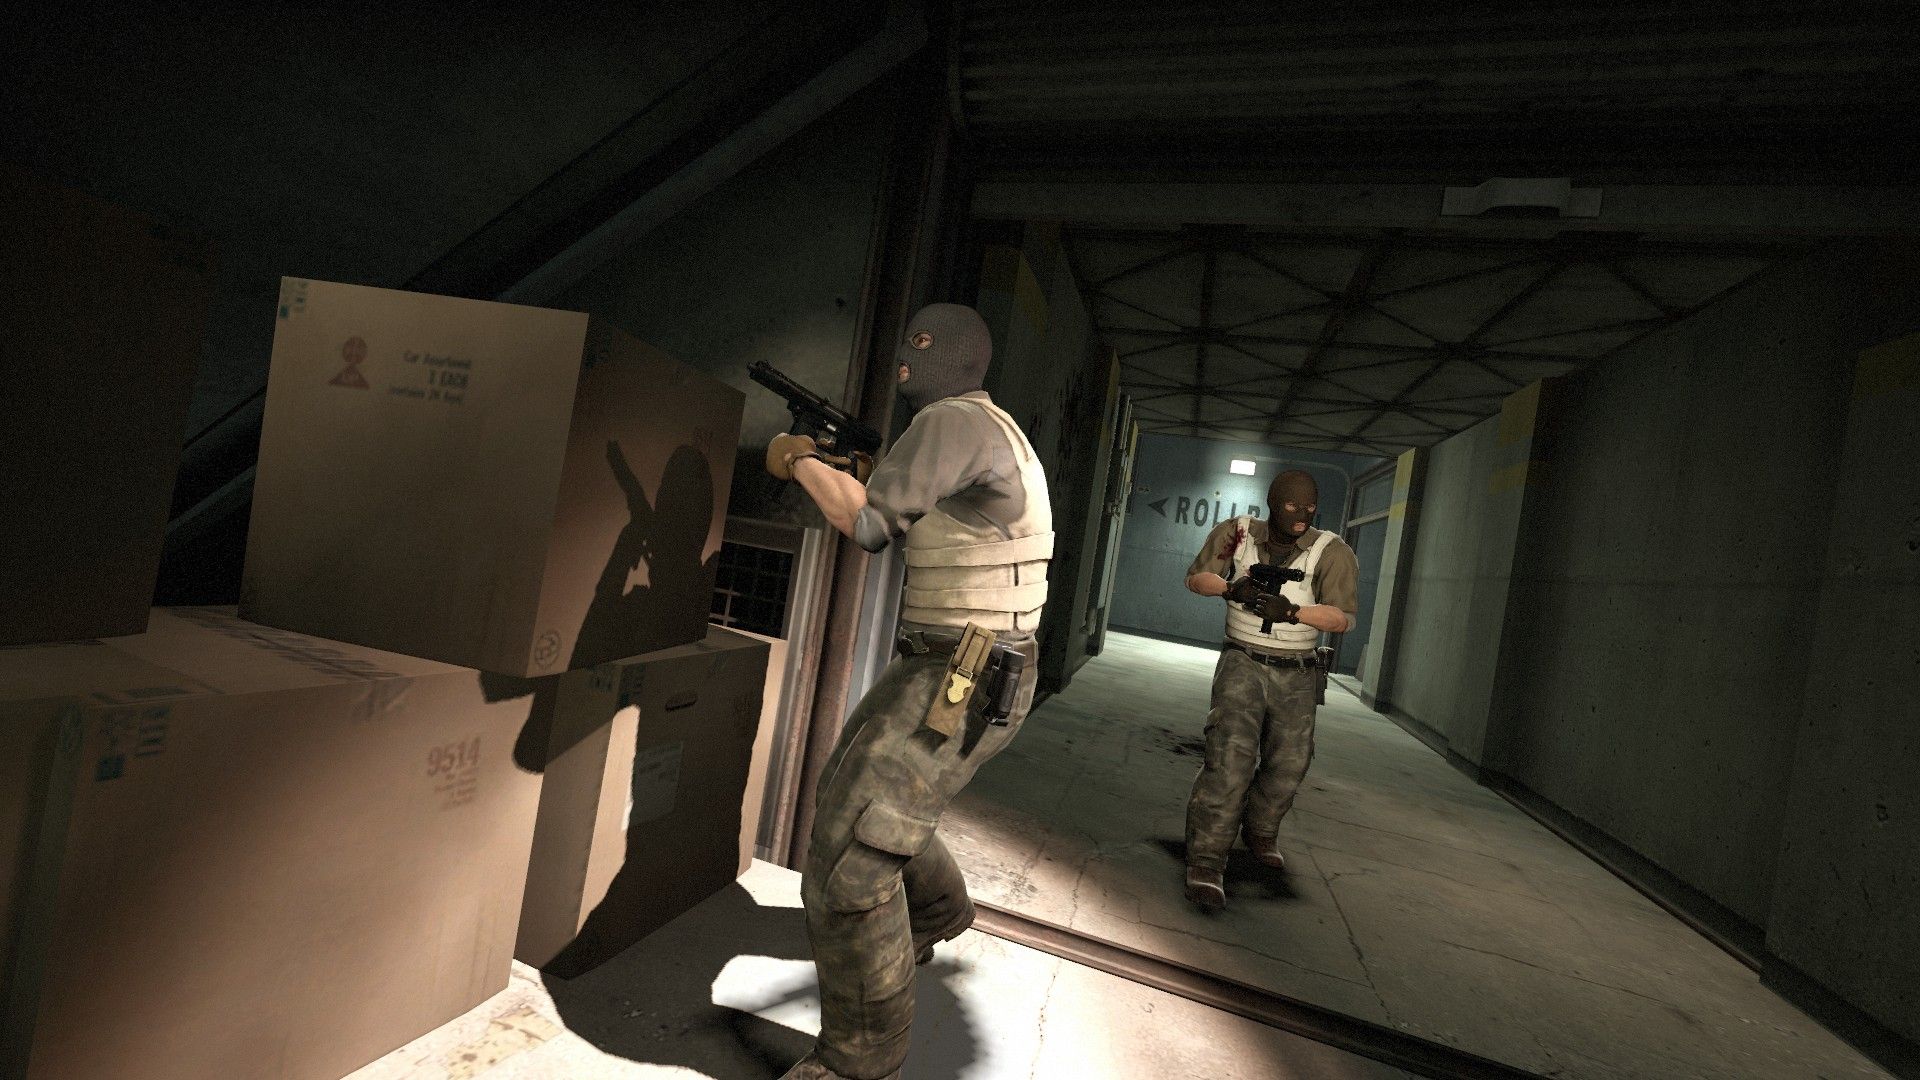 Counter-Strike: Global Offensive matchmaking details emerge – XBLAFans